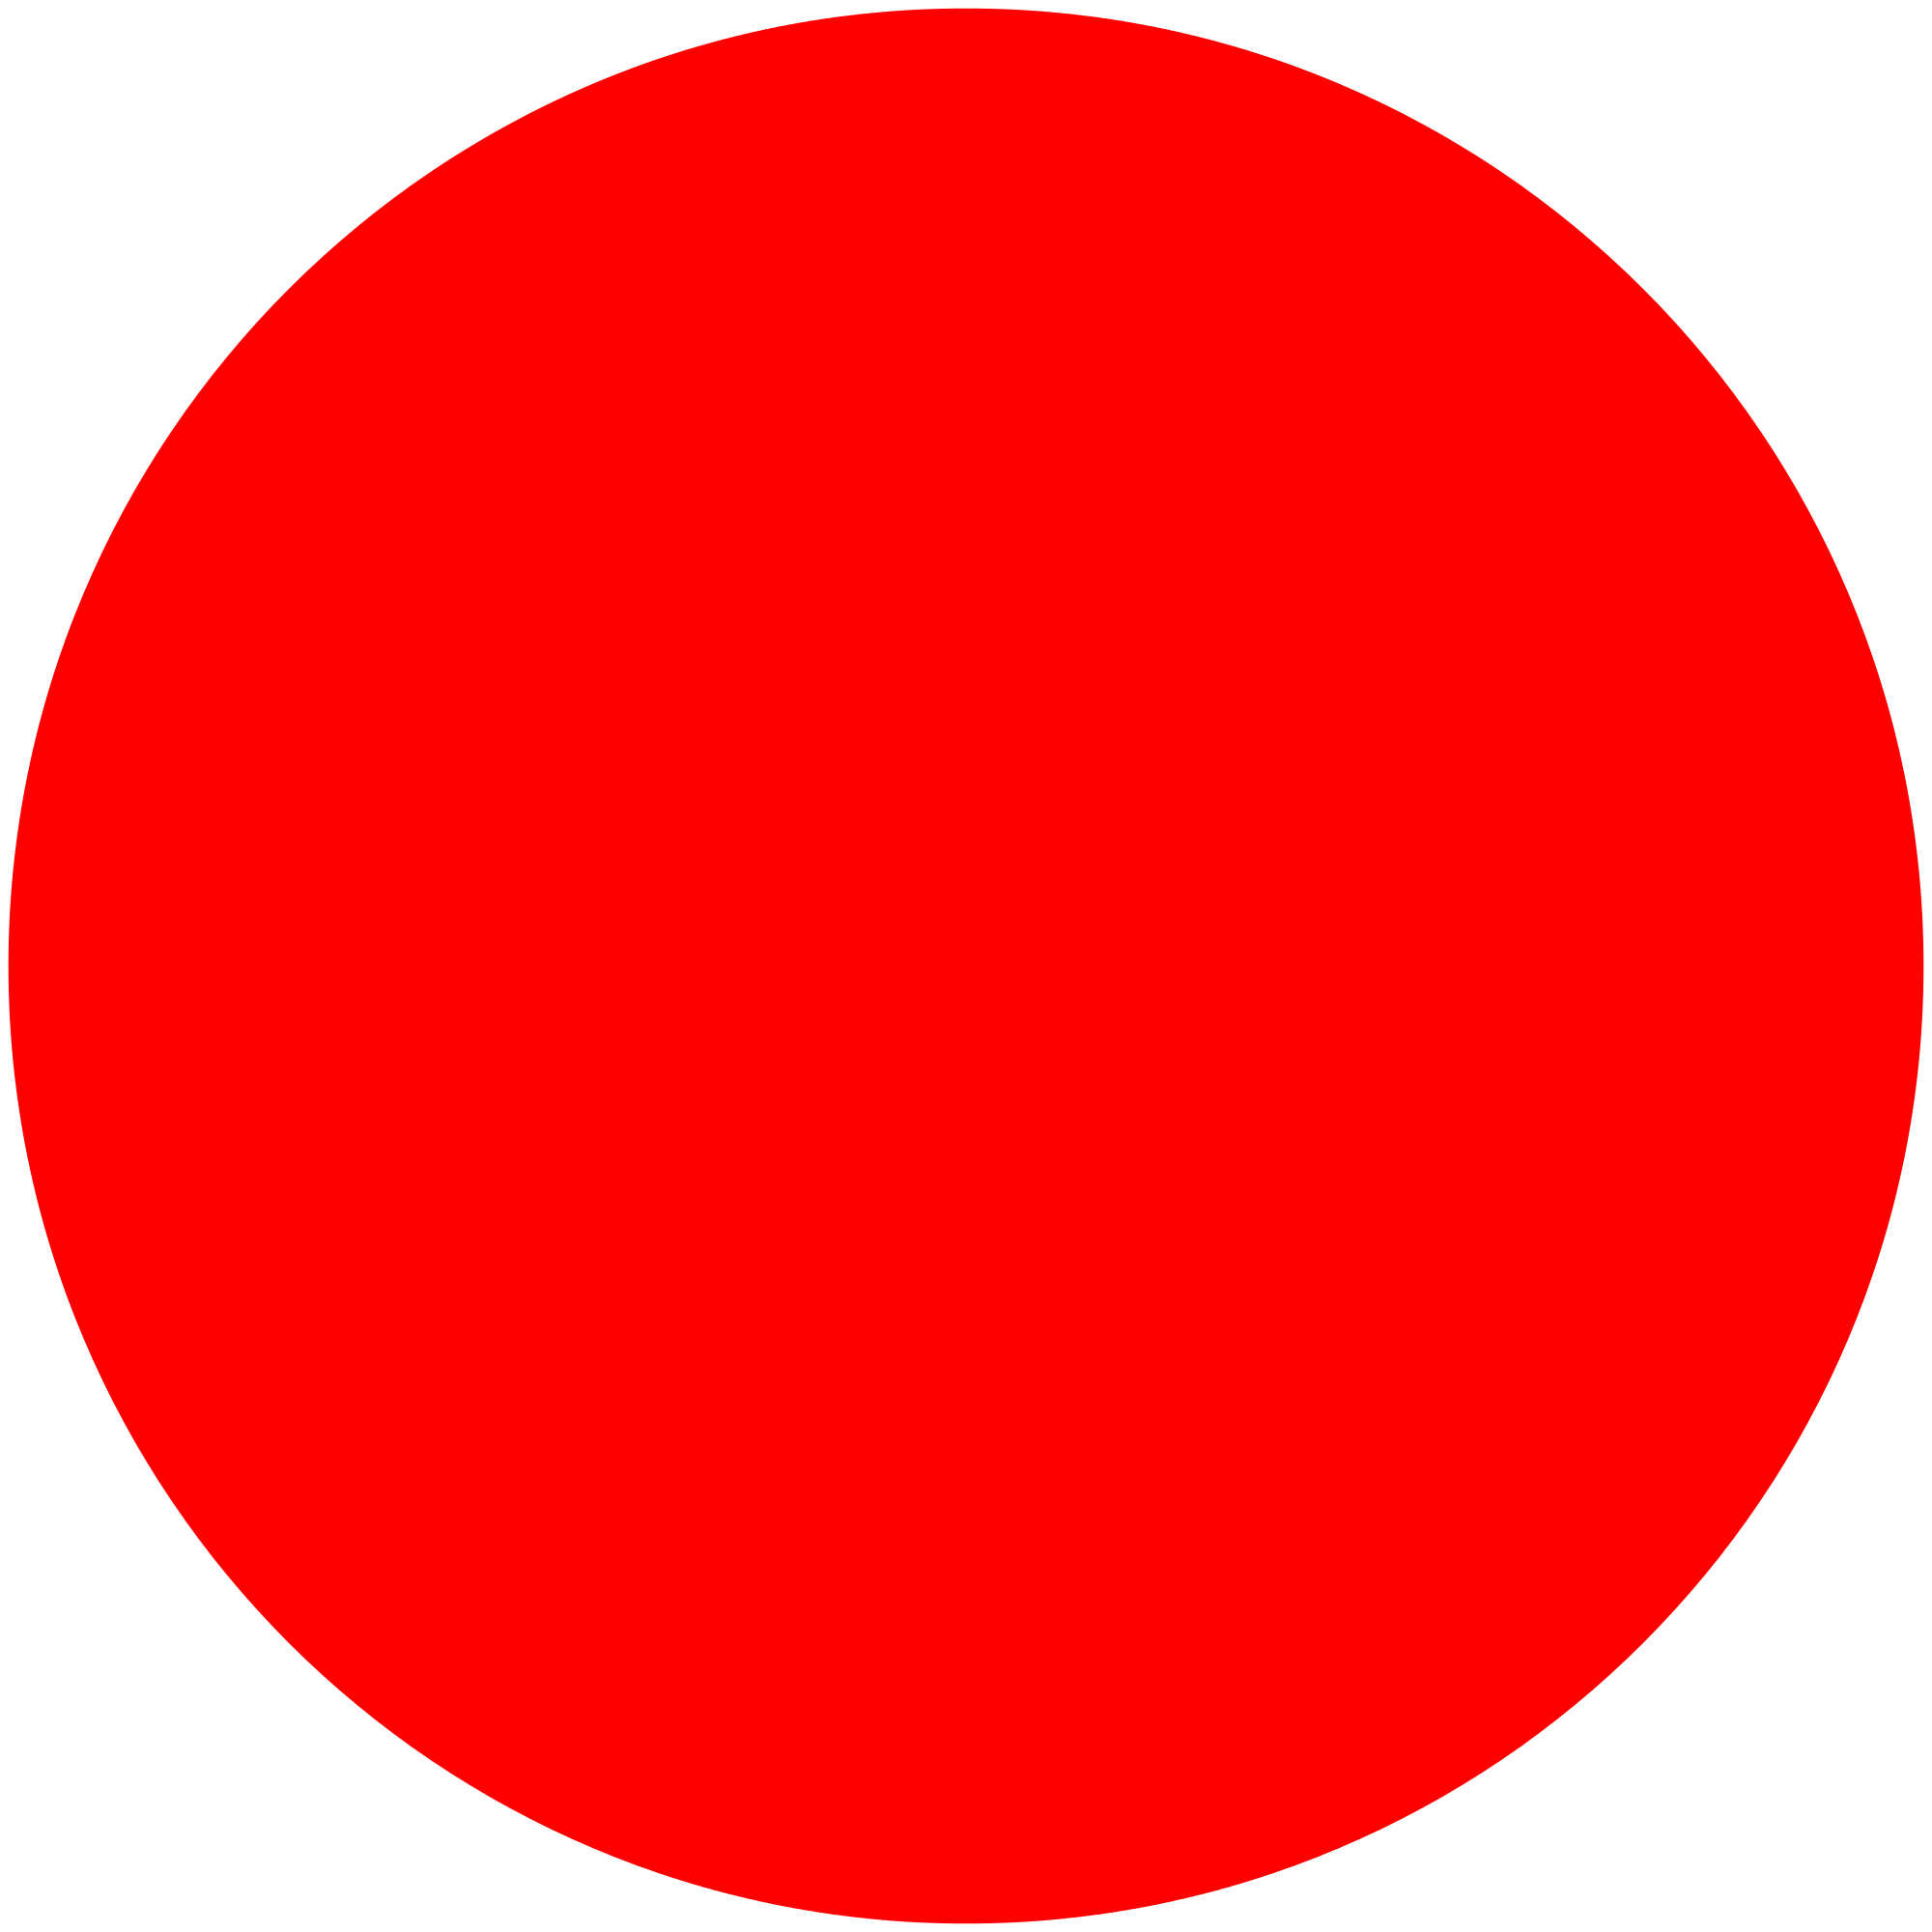 File:Disc Plain red.svg - Wikimedia Commons